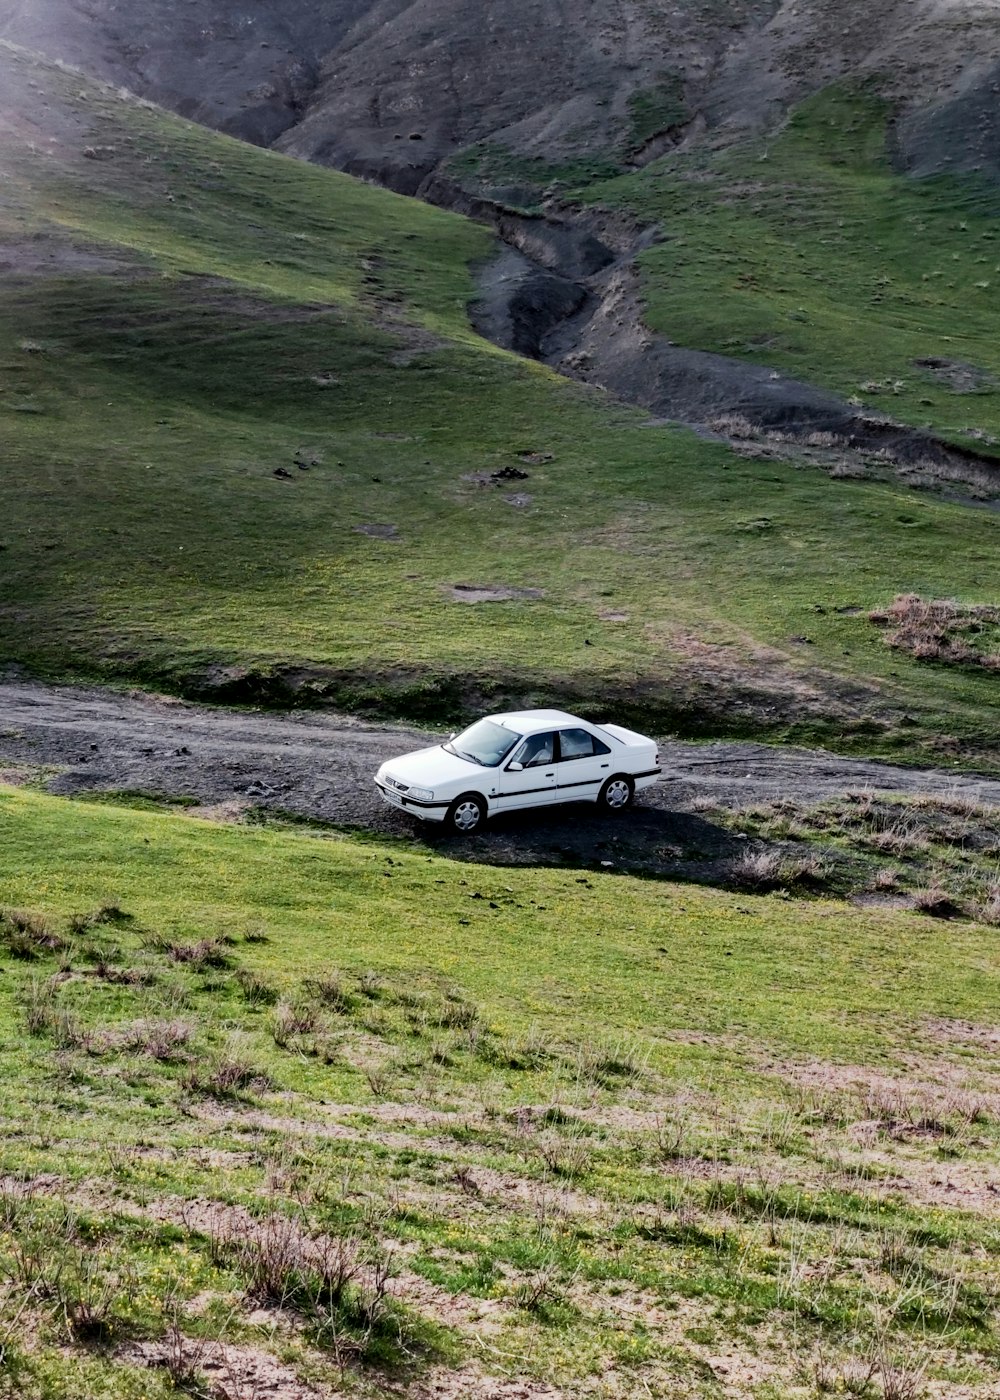 a small white car parked on a dirt road